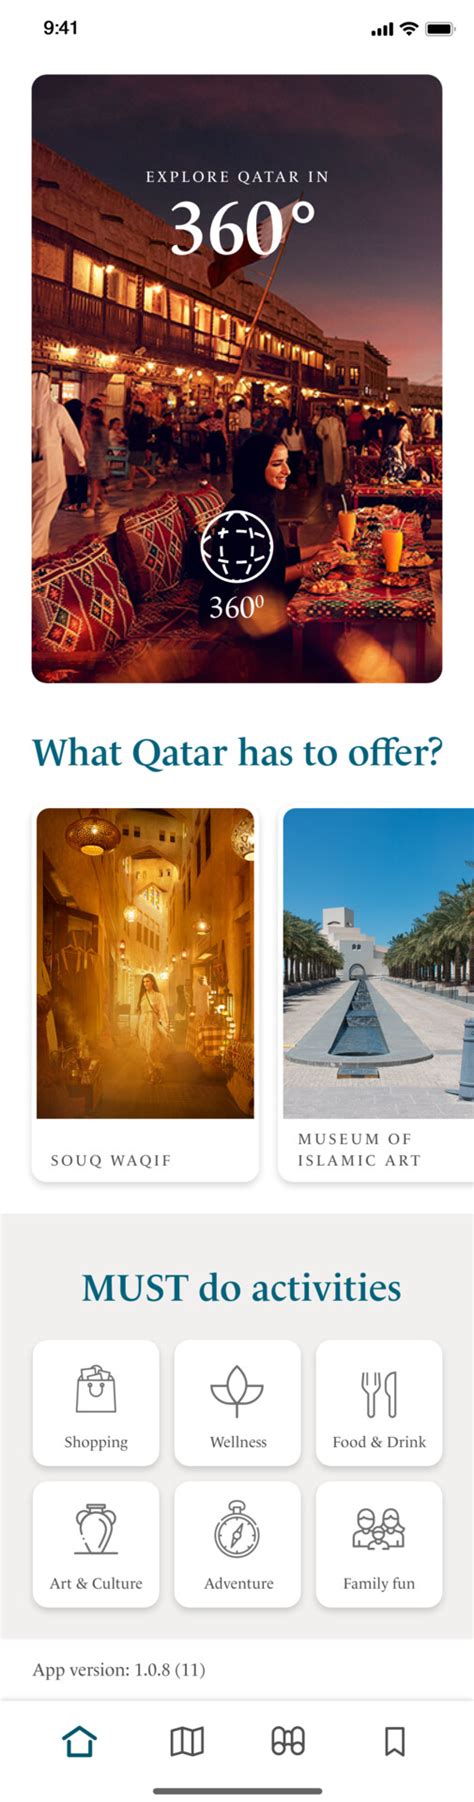 Qatar National Tourism Council Launches Mobile App Offering